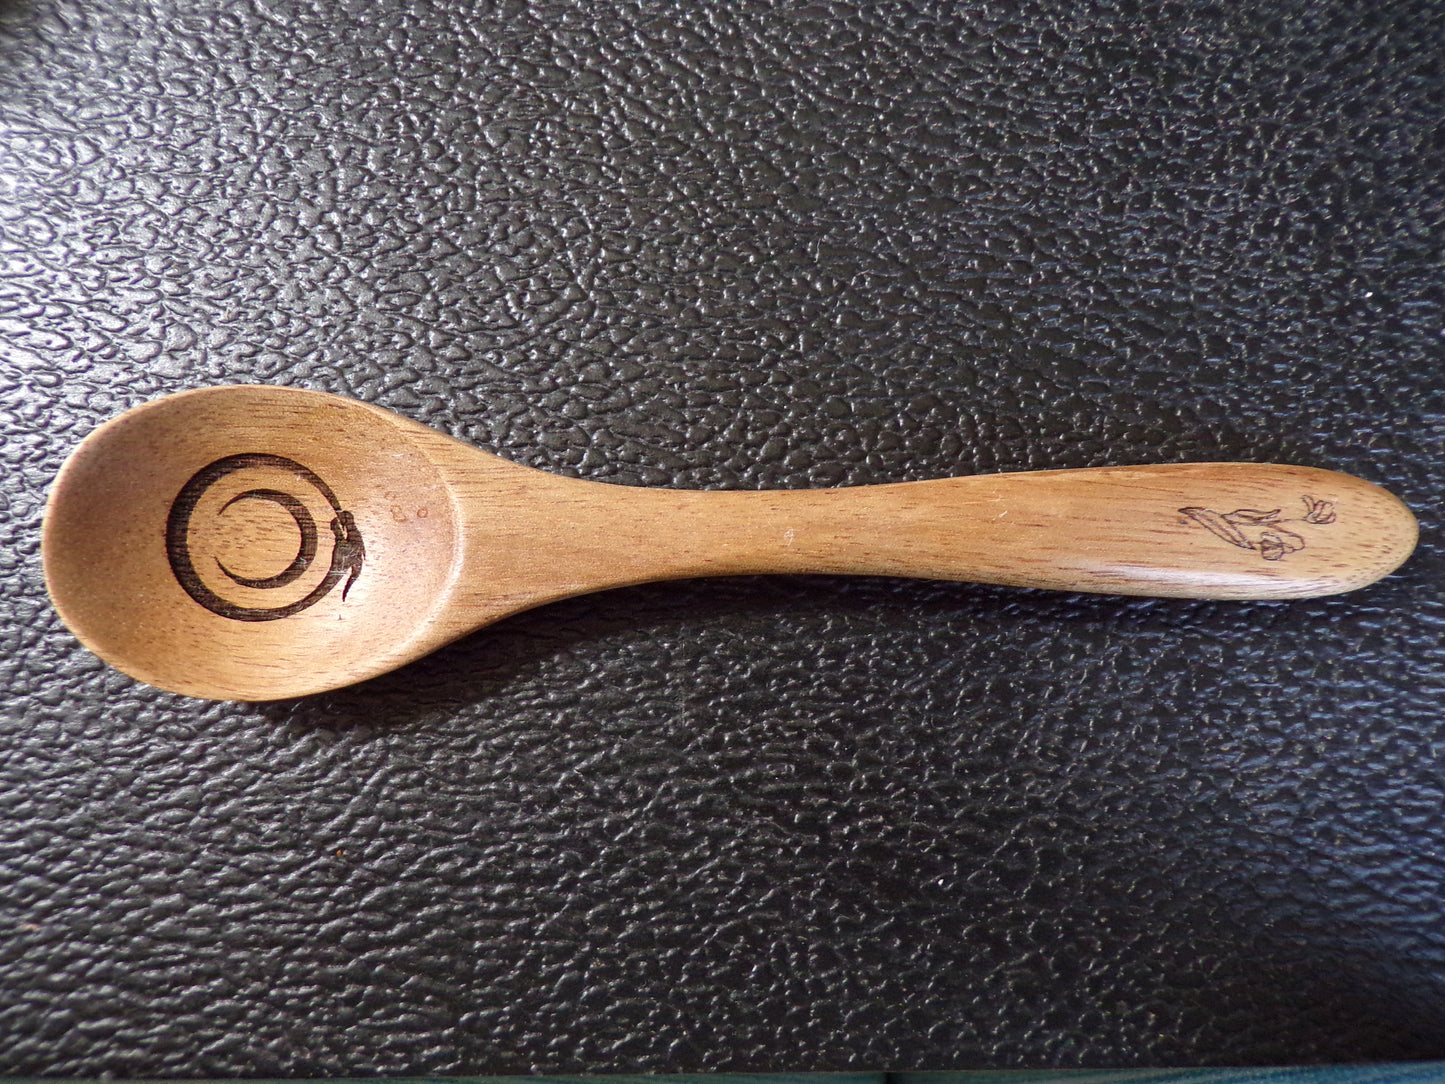 Styx Acacia wood spoon with a Snowdrop and Ouroboros